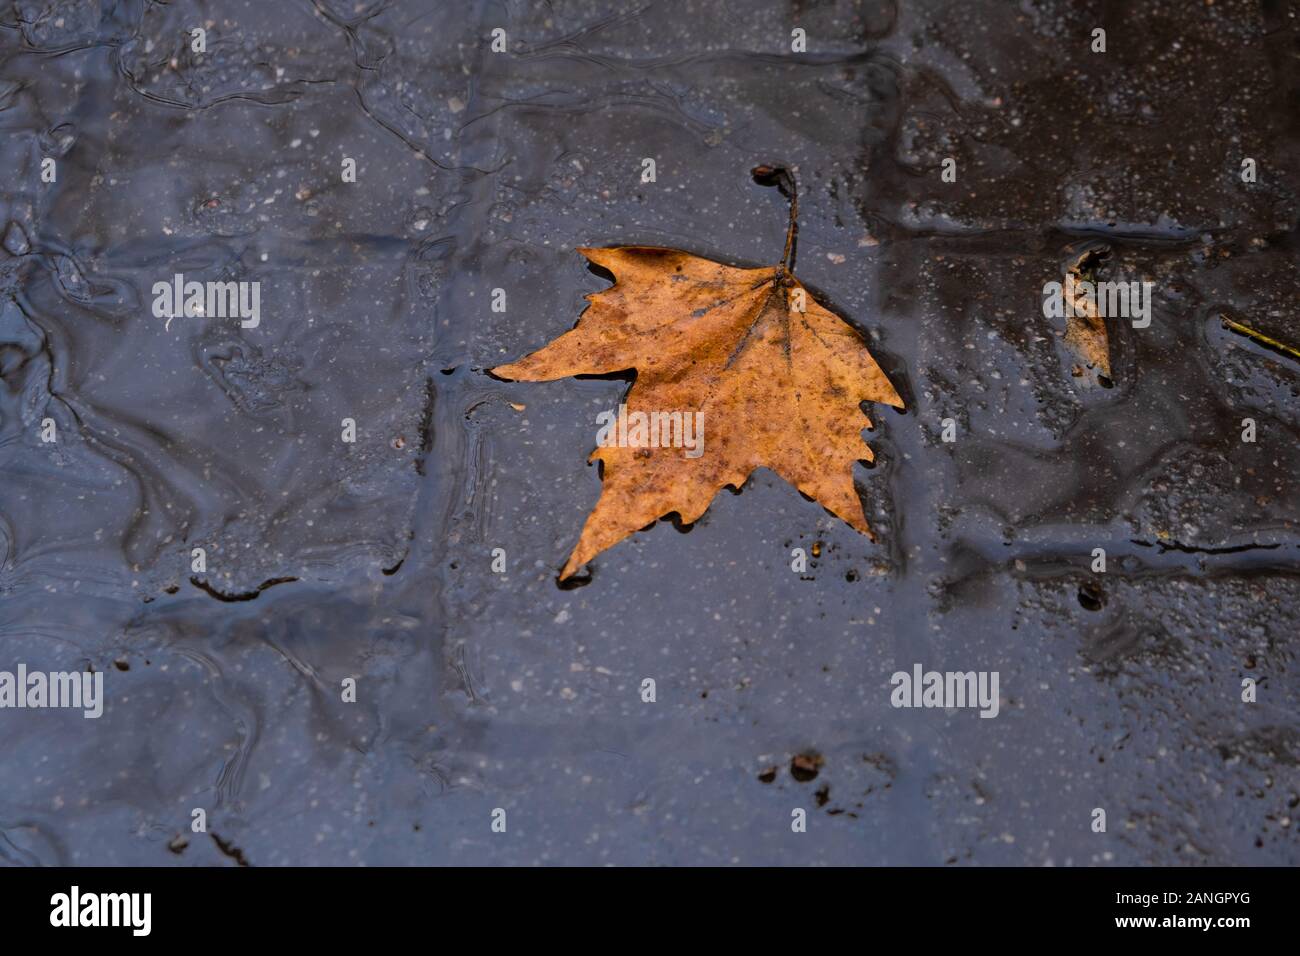 fall leave in water, floating autumn leaf. Fall season leaves in rain. October weather, november nature background. Beautiful reflection in water Stock Photo